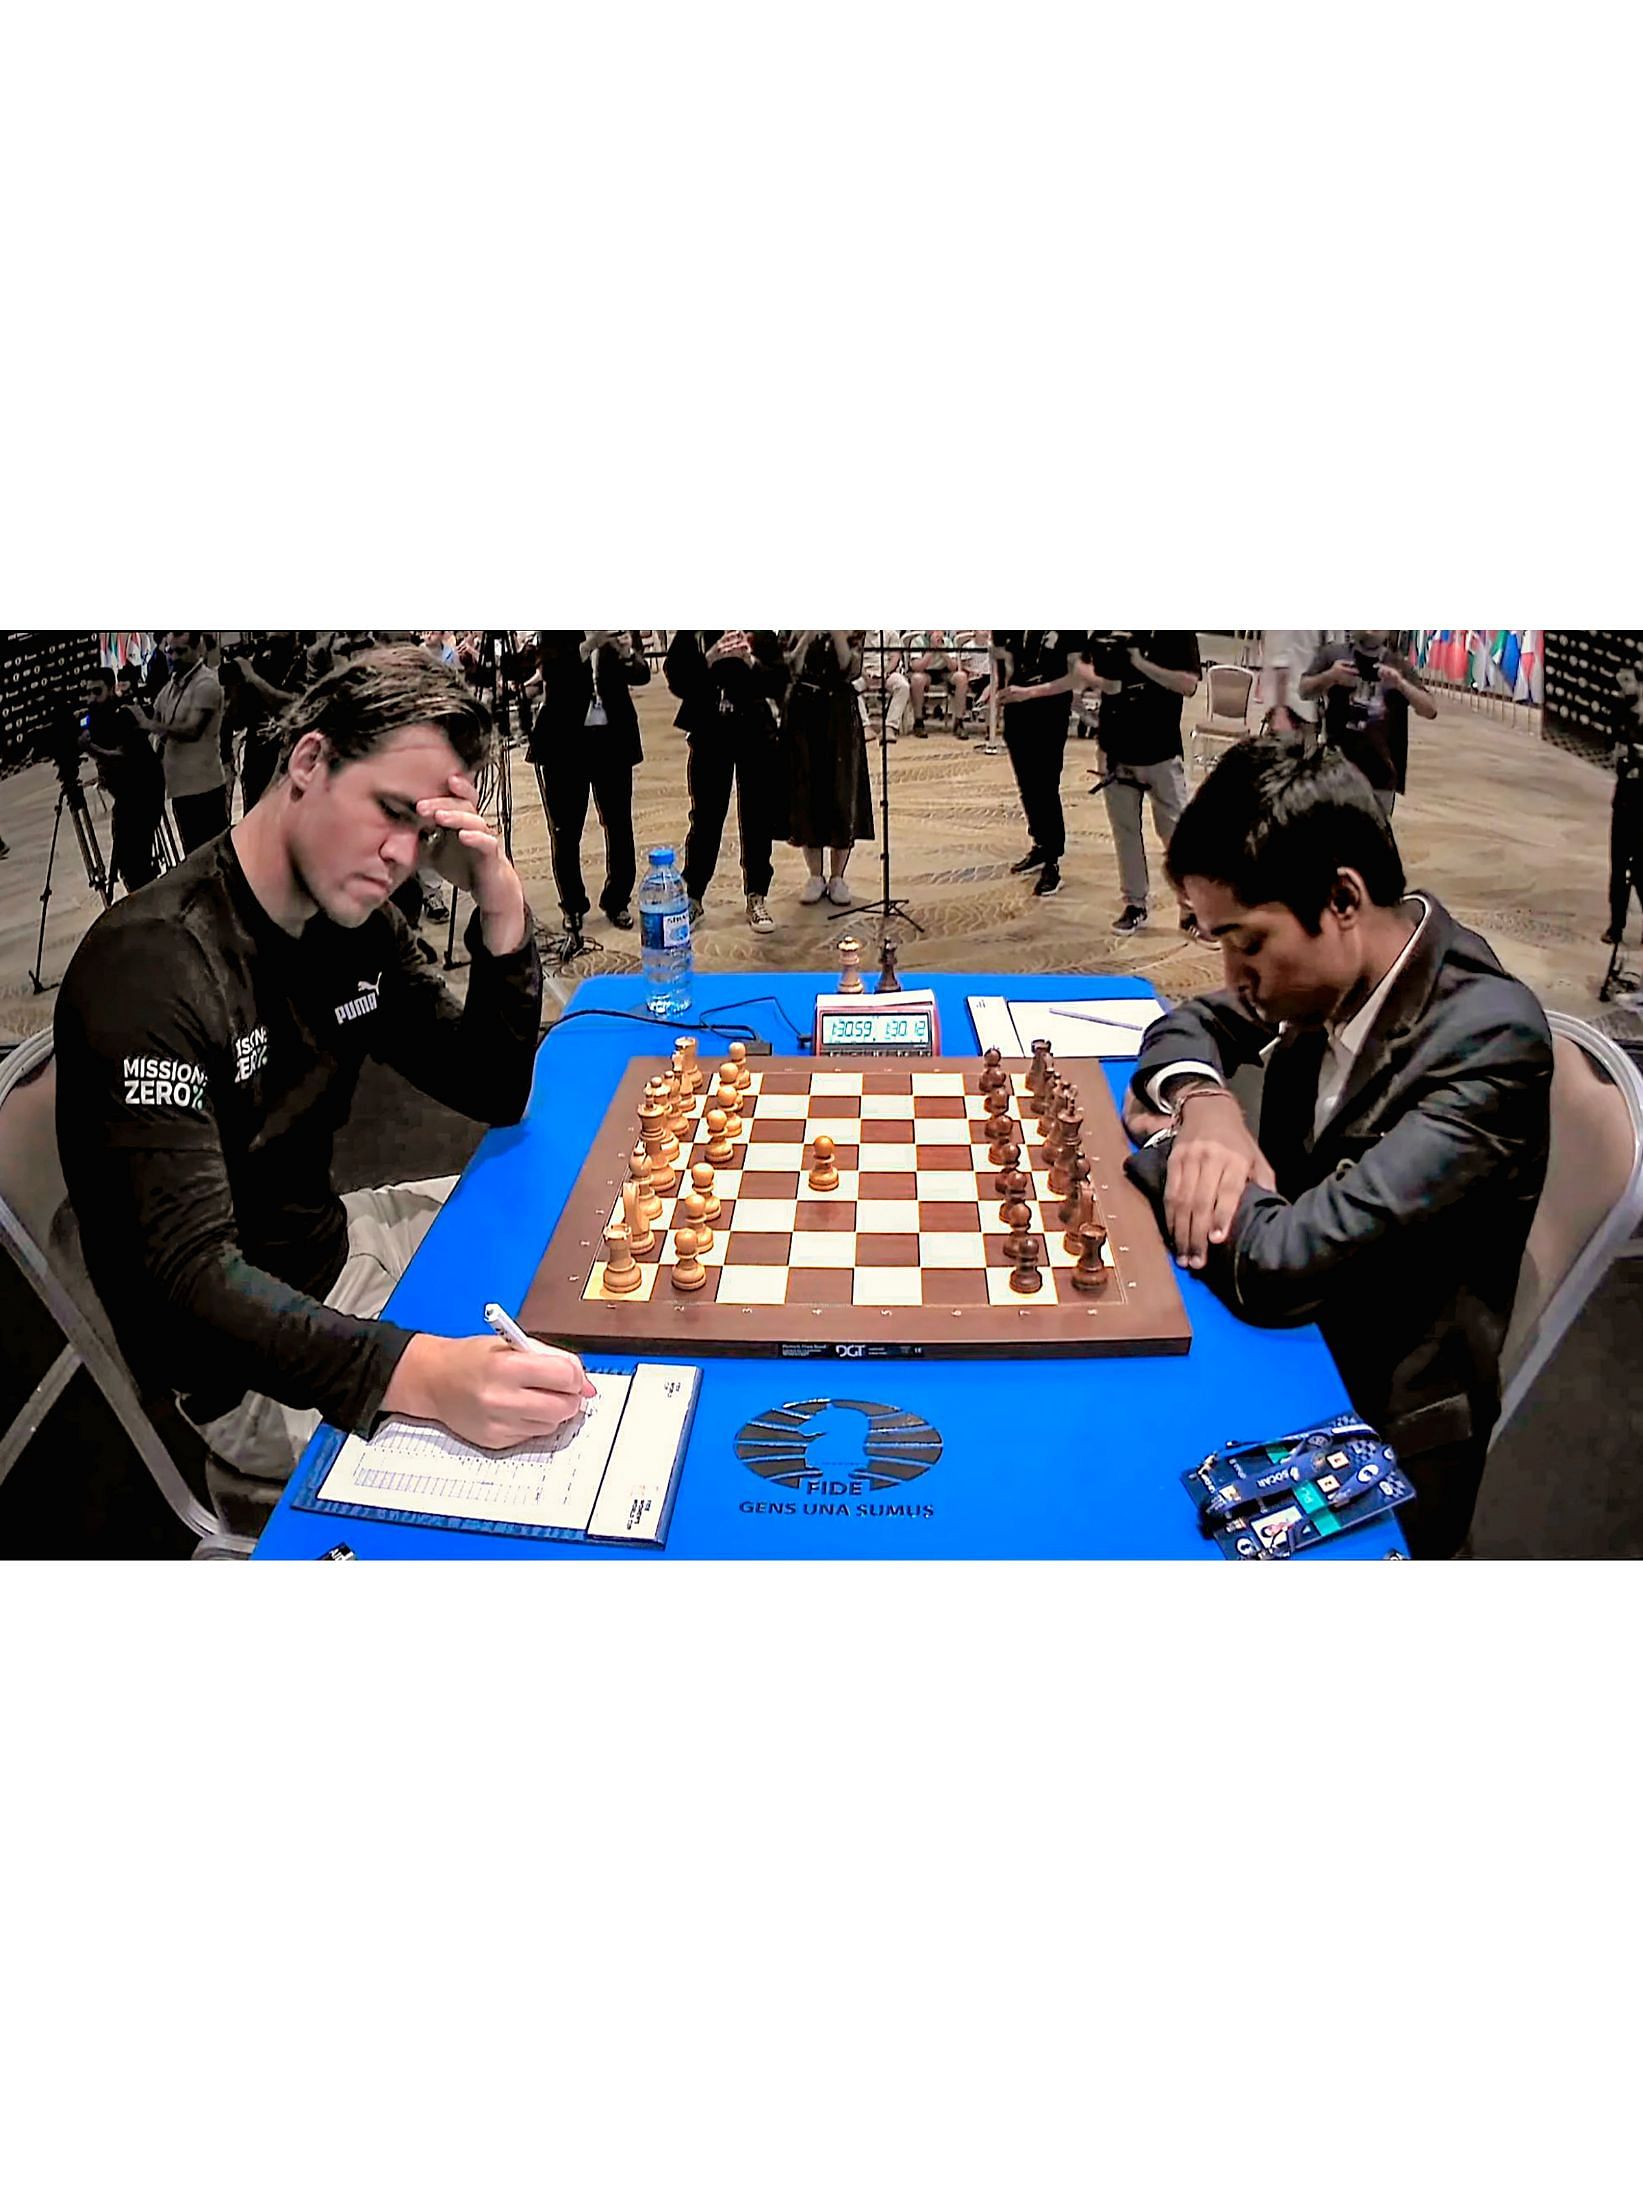 Chess World Cup 2023 Final: Praggnanandhaa vs Carlsen to be decided via tie- breaker on Thursday after draw in Game 2 - India Today